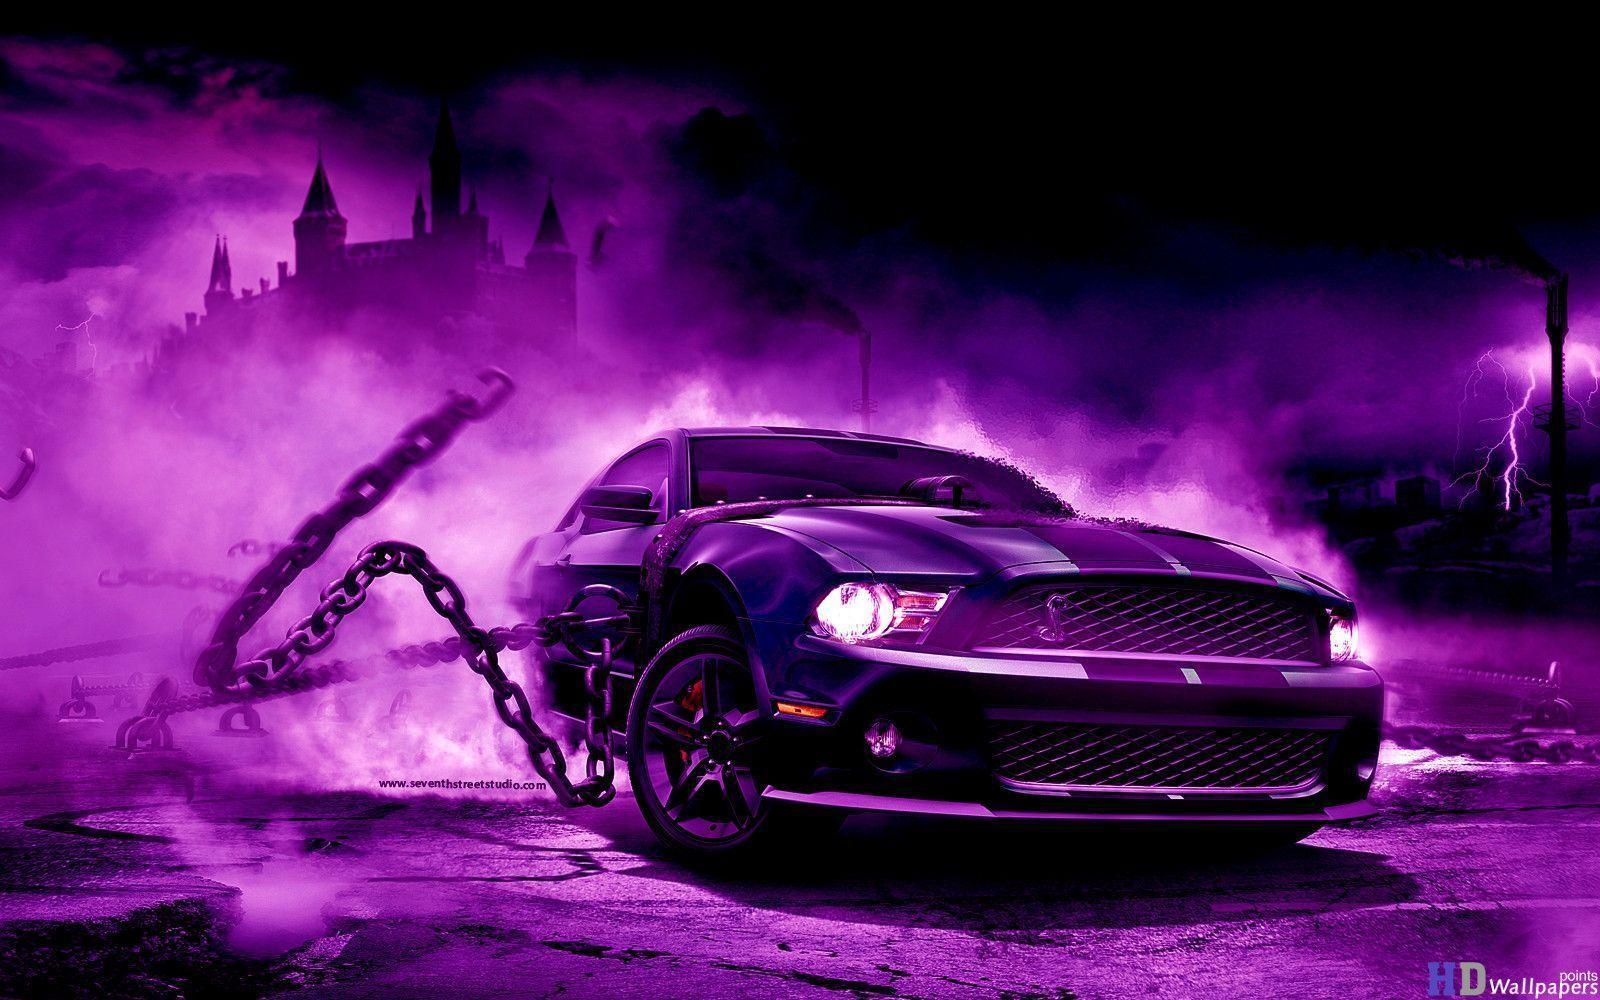 Awesome Car Wallpaper For iPhone · Cool Car Wallpaper. Best